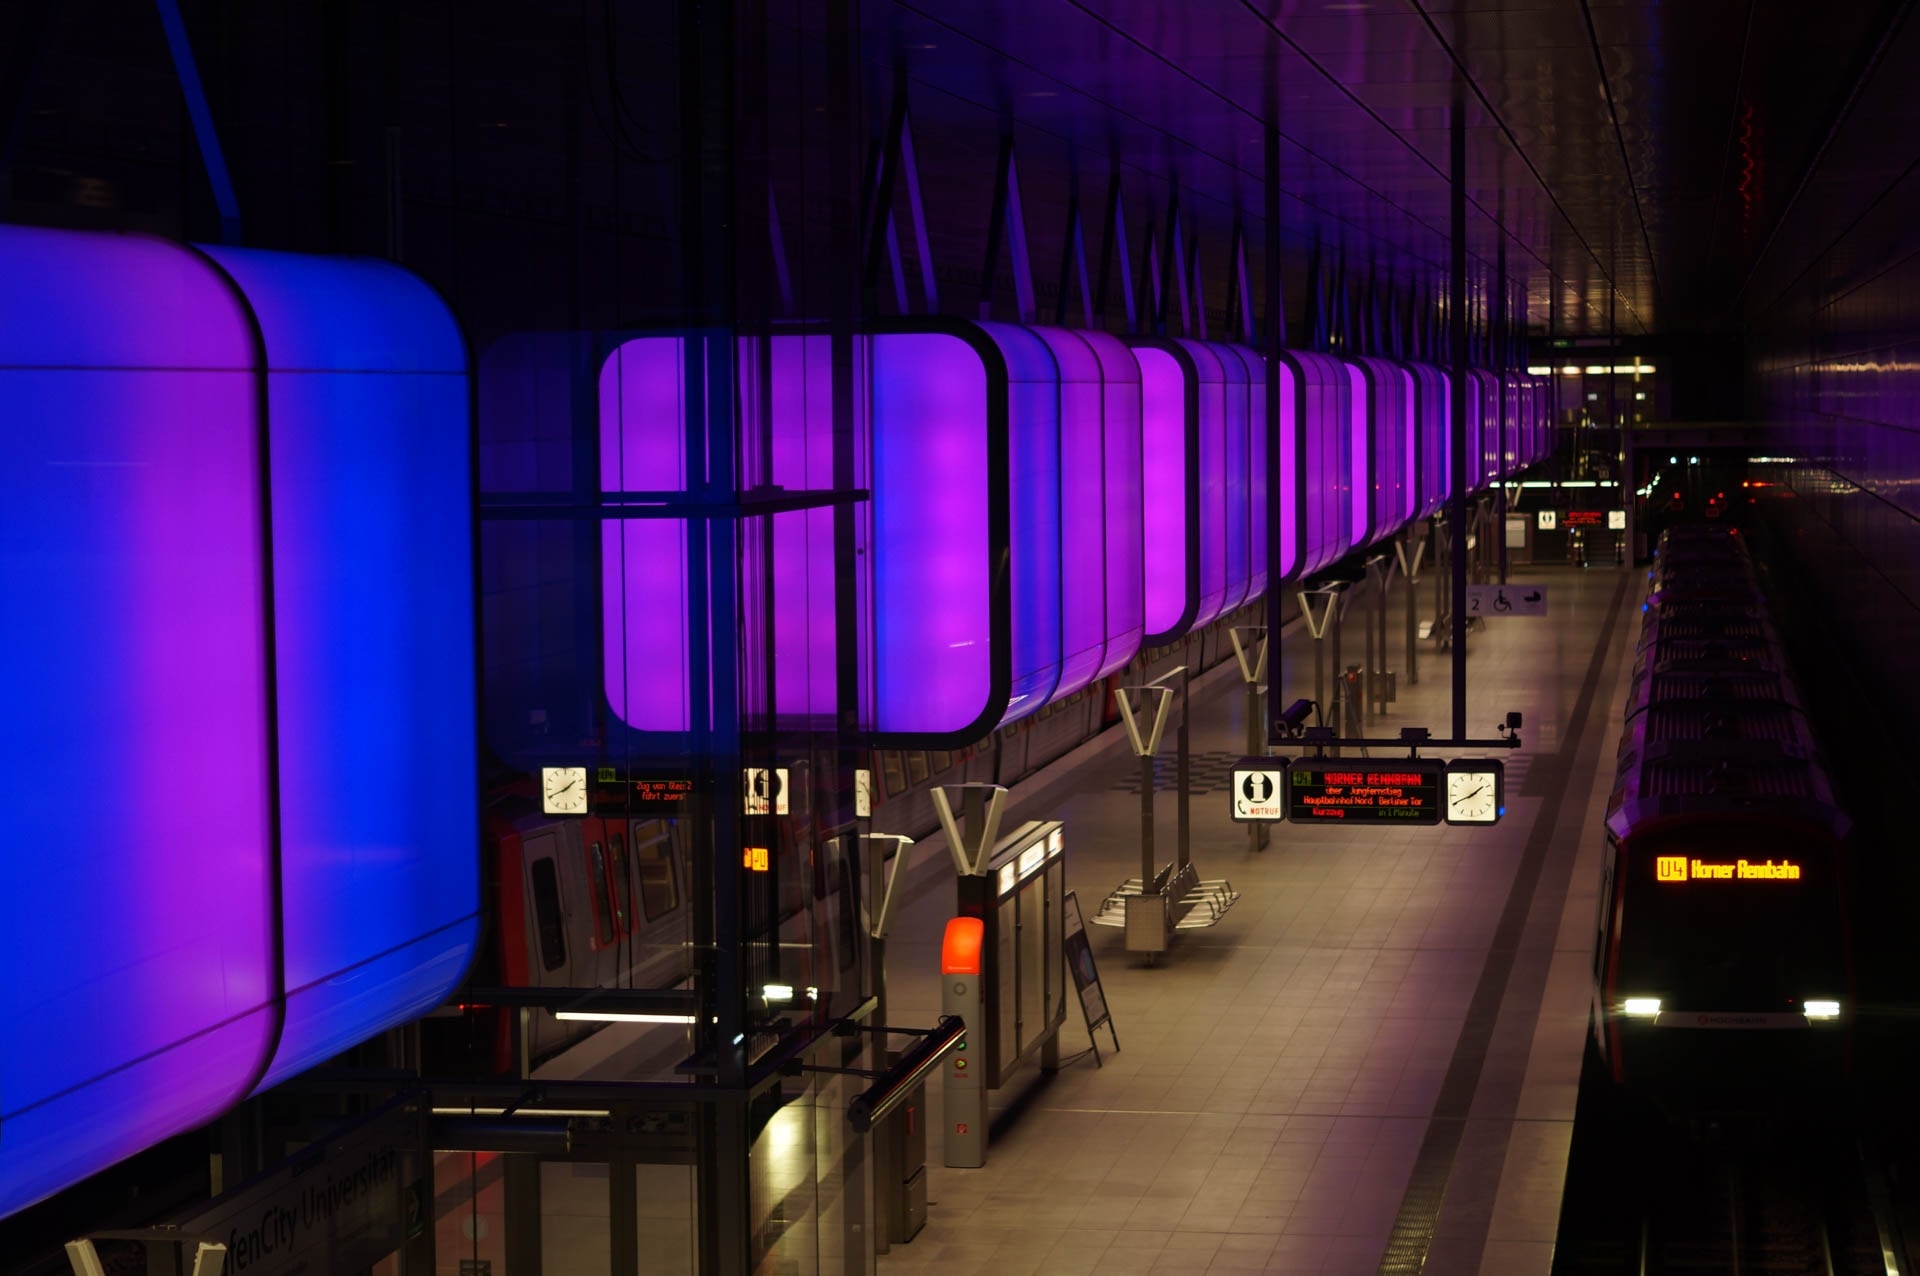 station during night time